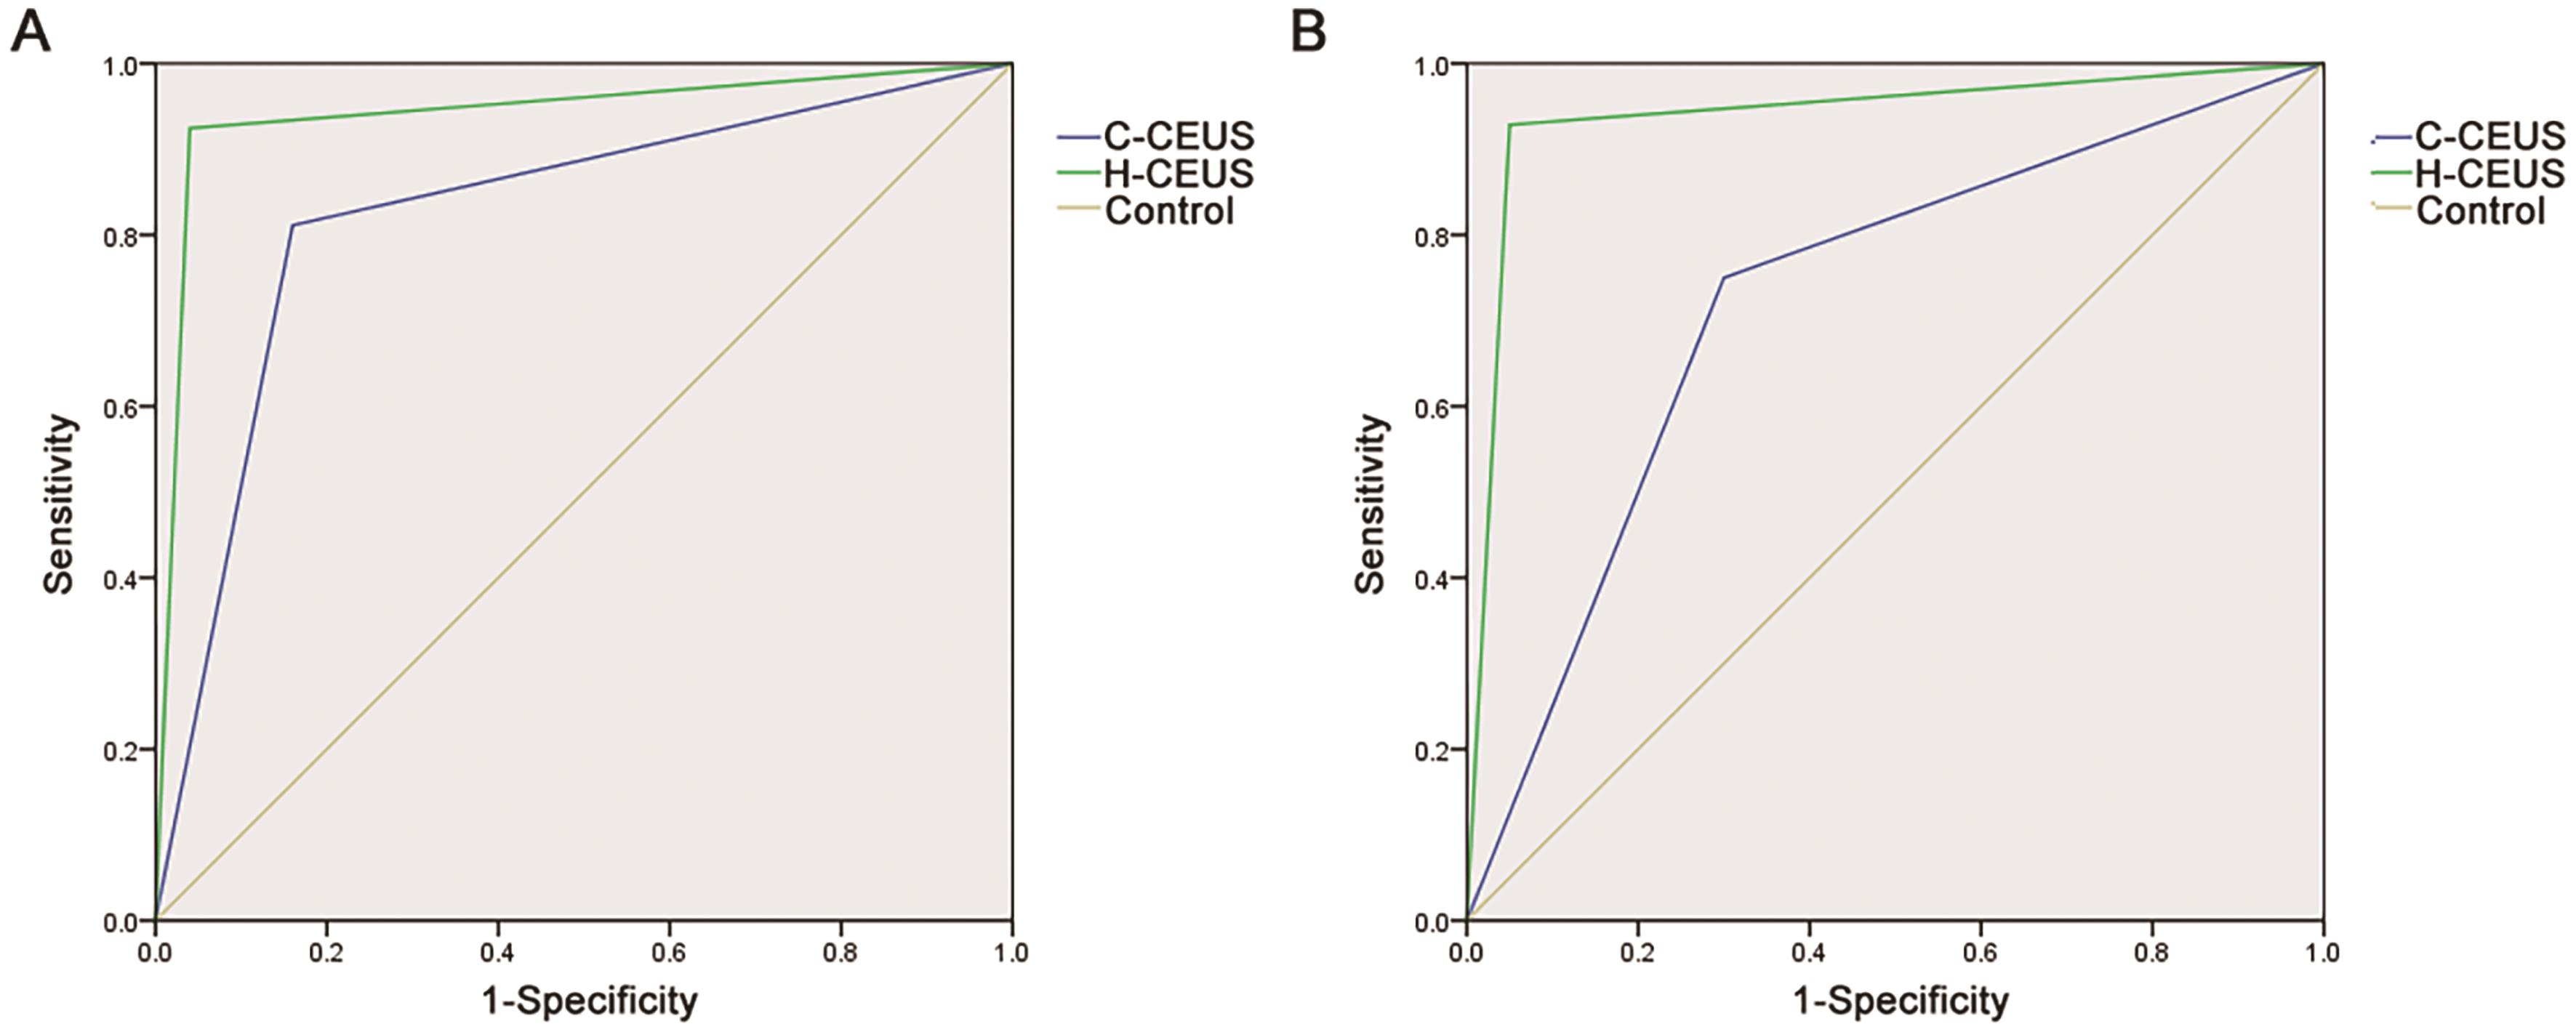 ROC analysis of C-CEUS and H-CEUS for the diagnosis of malignant FLL.